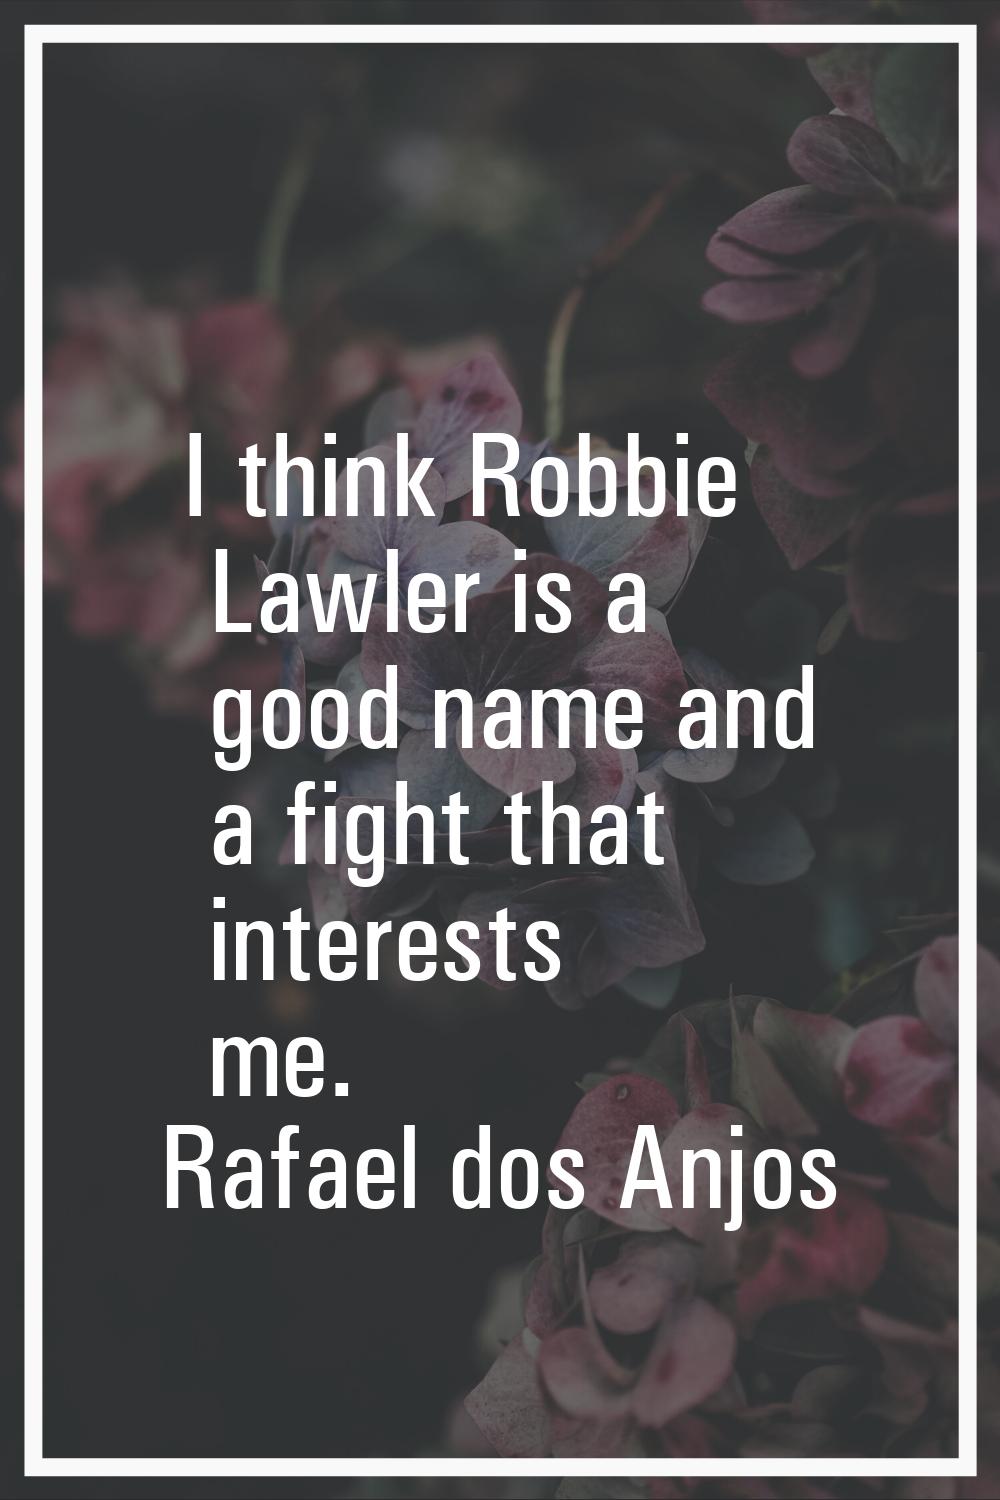 I think Robbie Lawler is a good name and a fight that interests me.